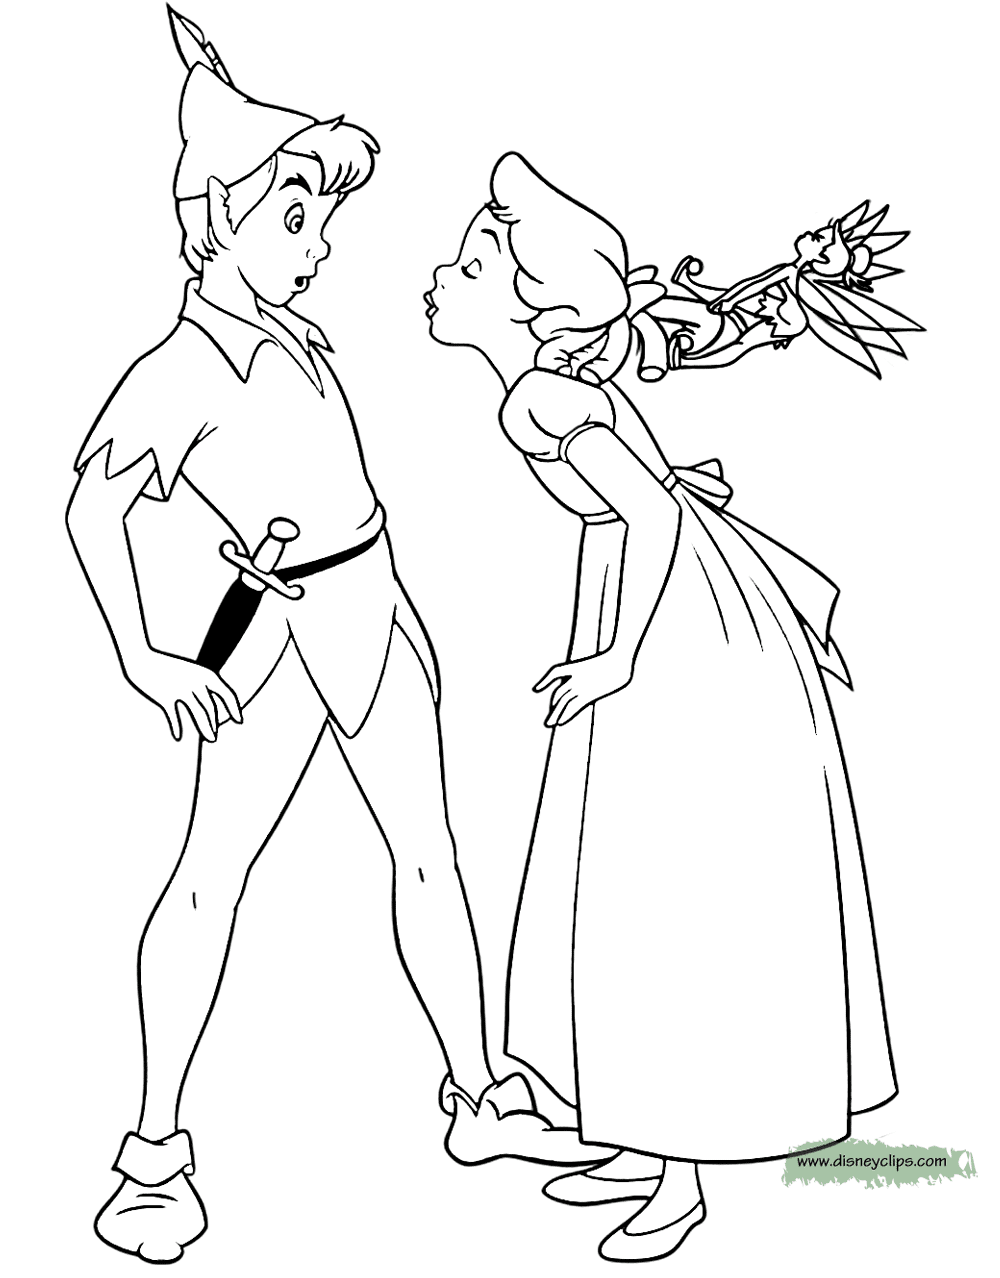 Peter Pan And Wendy Coloring Page Disney Coloring Pages Peter Pan My